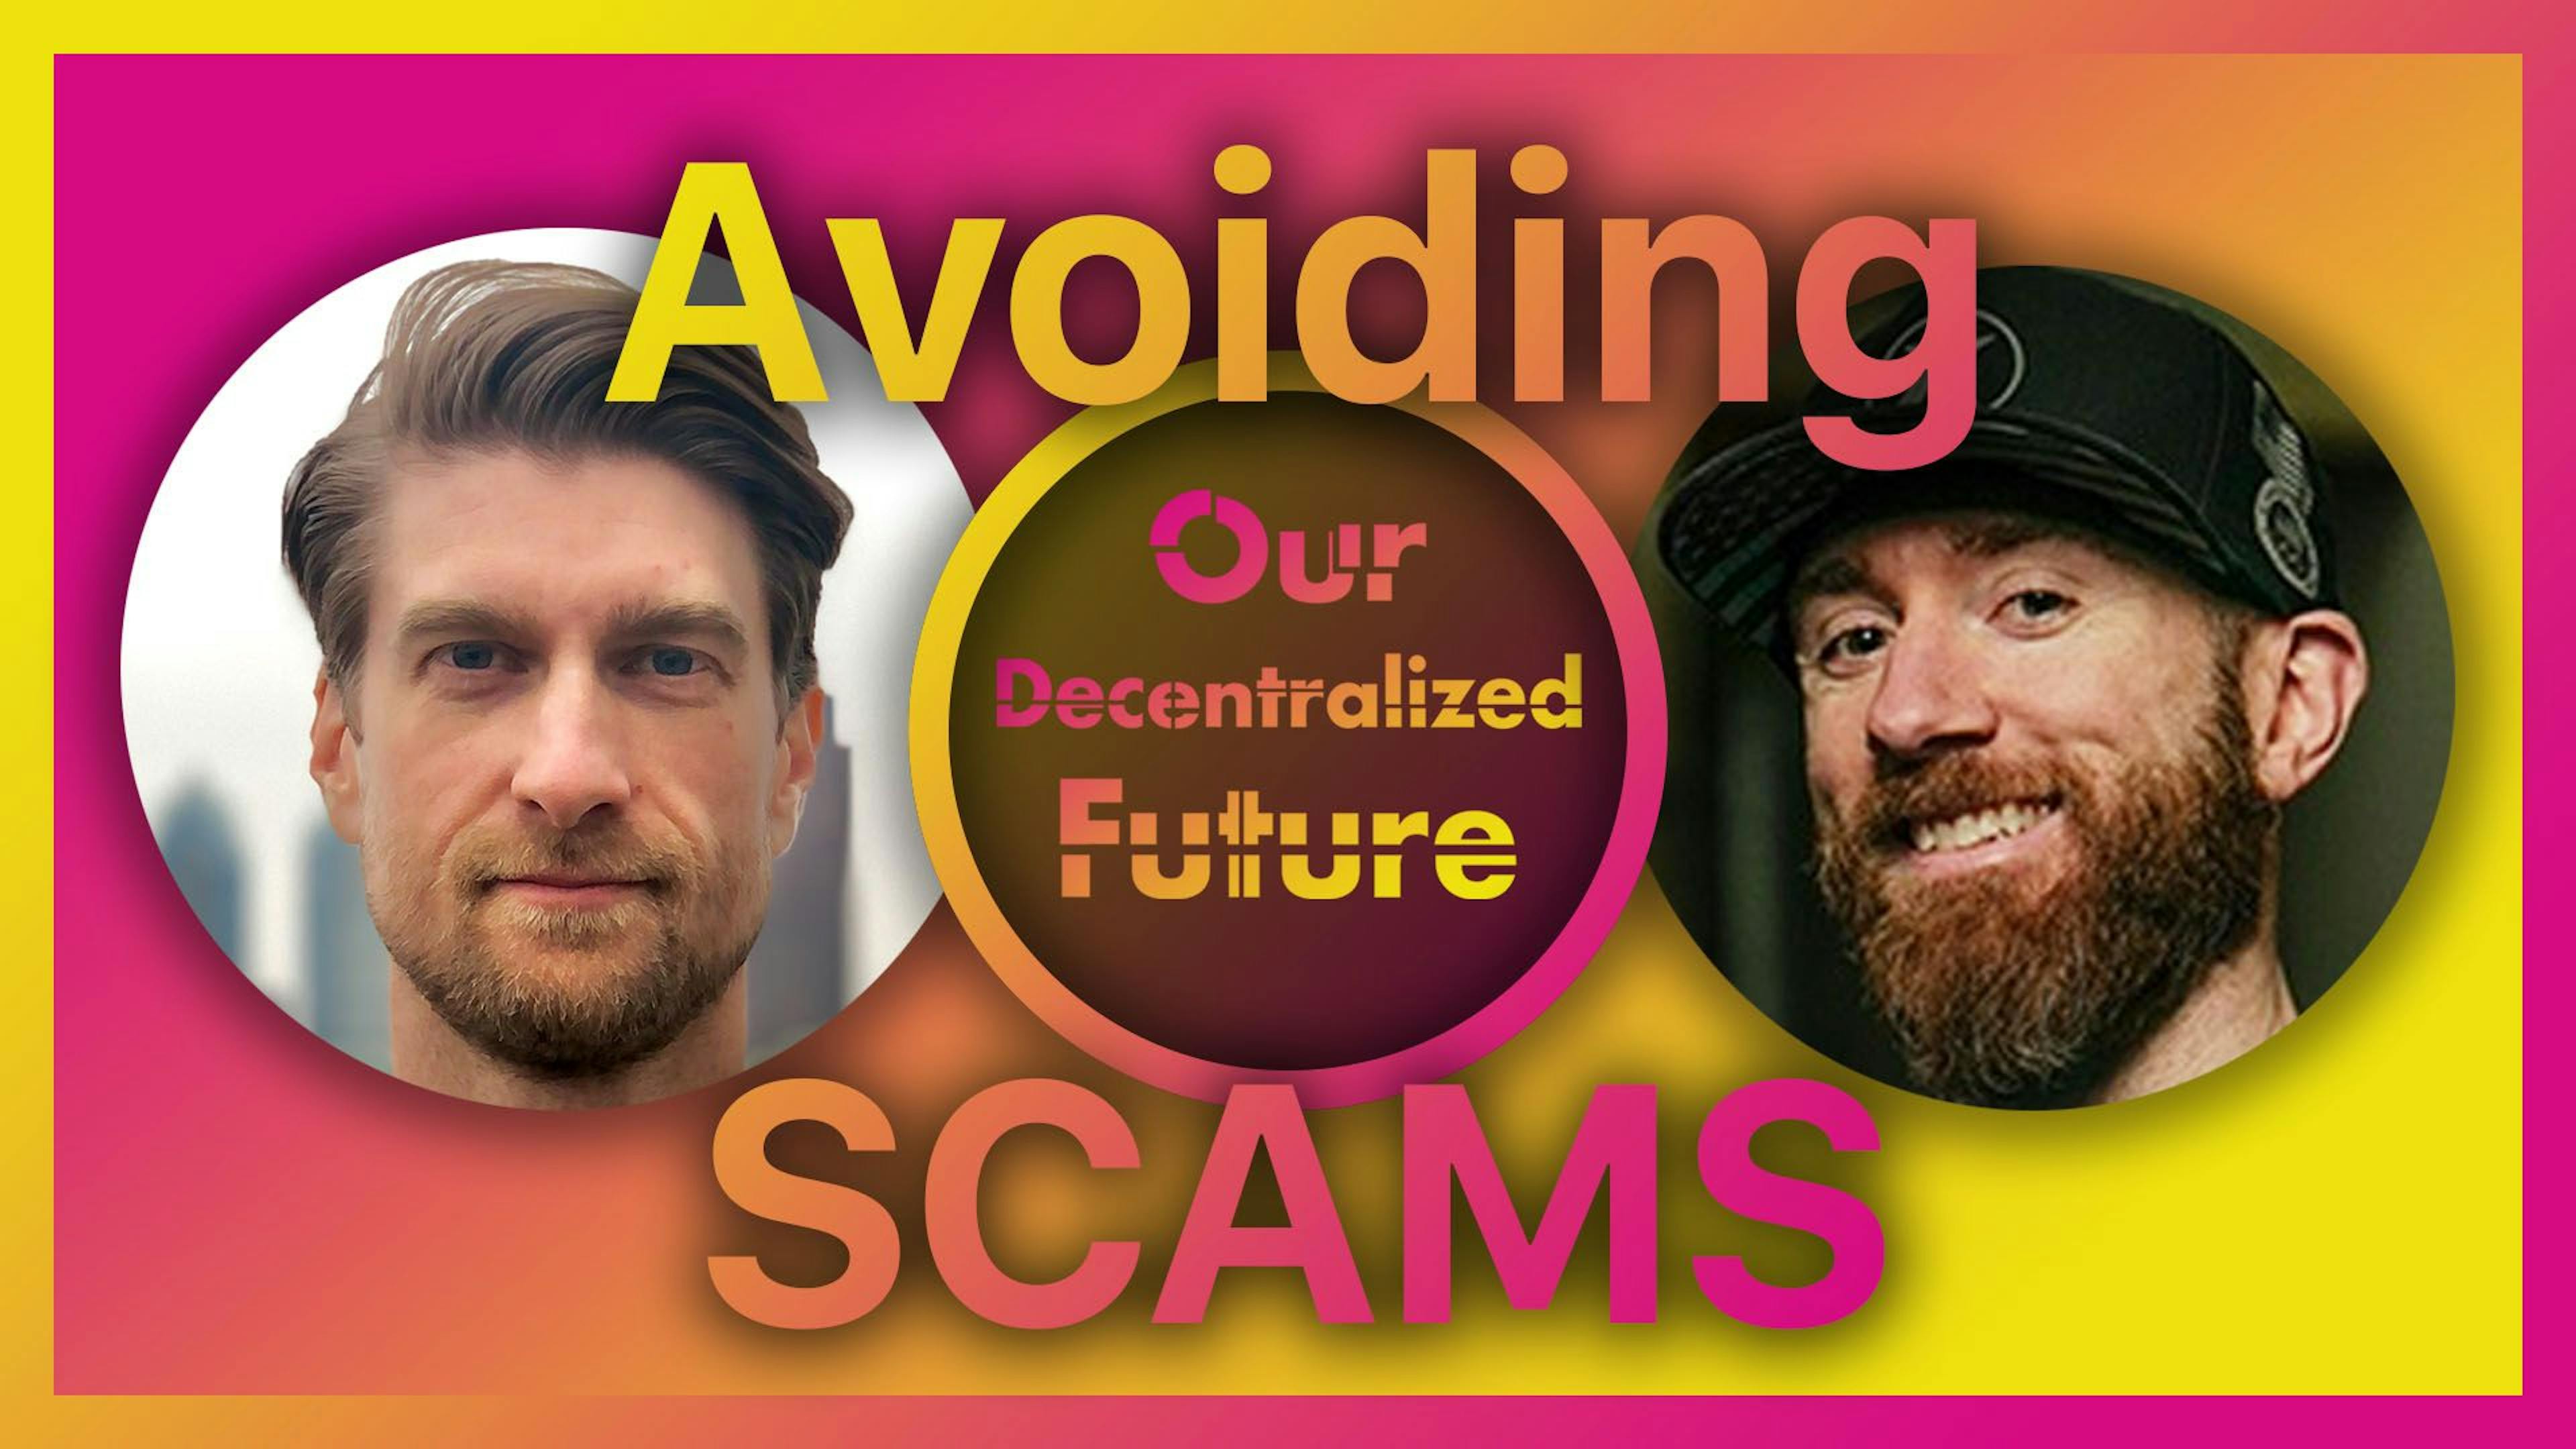 /hey-mark-cuban-this-is-how-you-avoid-crypto-scams-watch-video-p53k35xv feature image